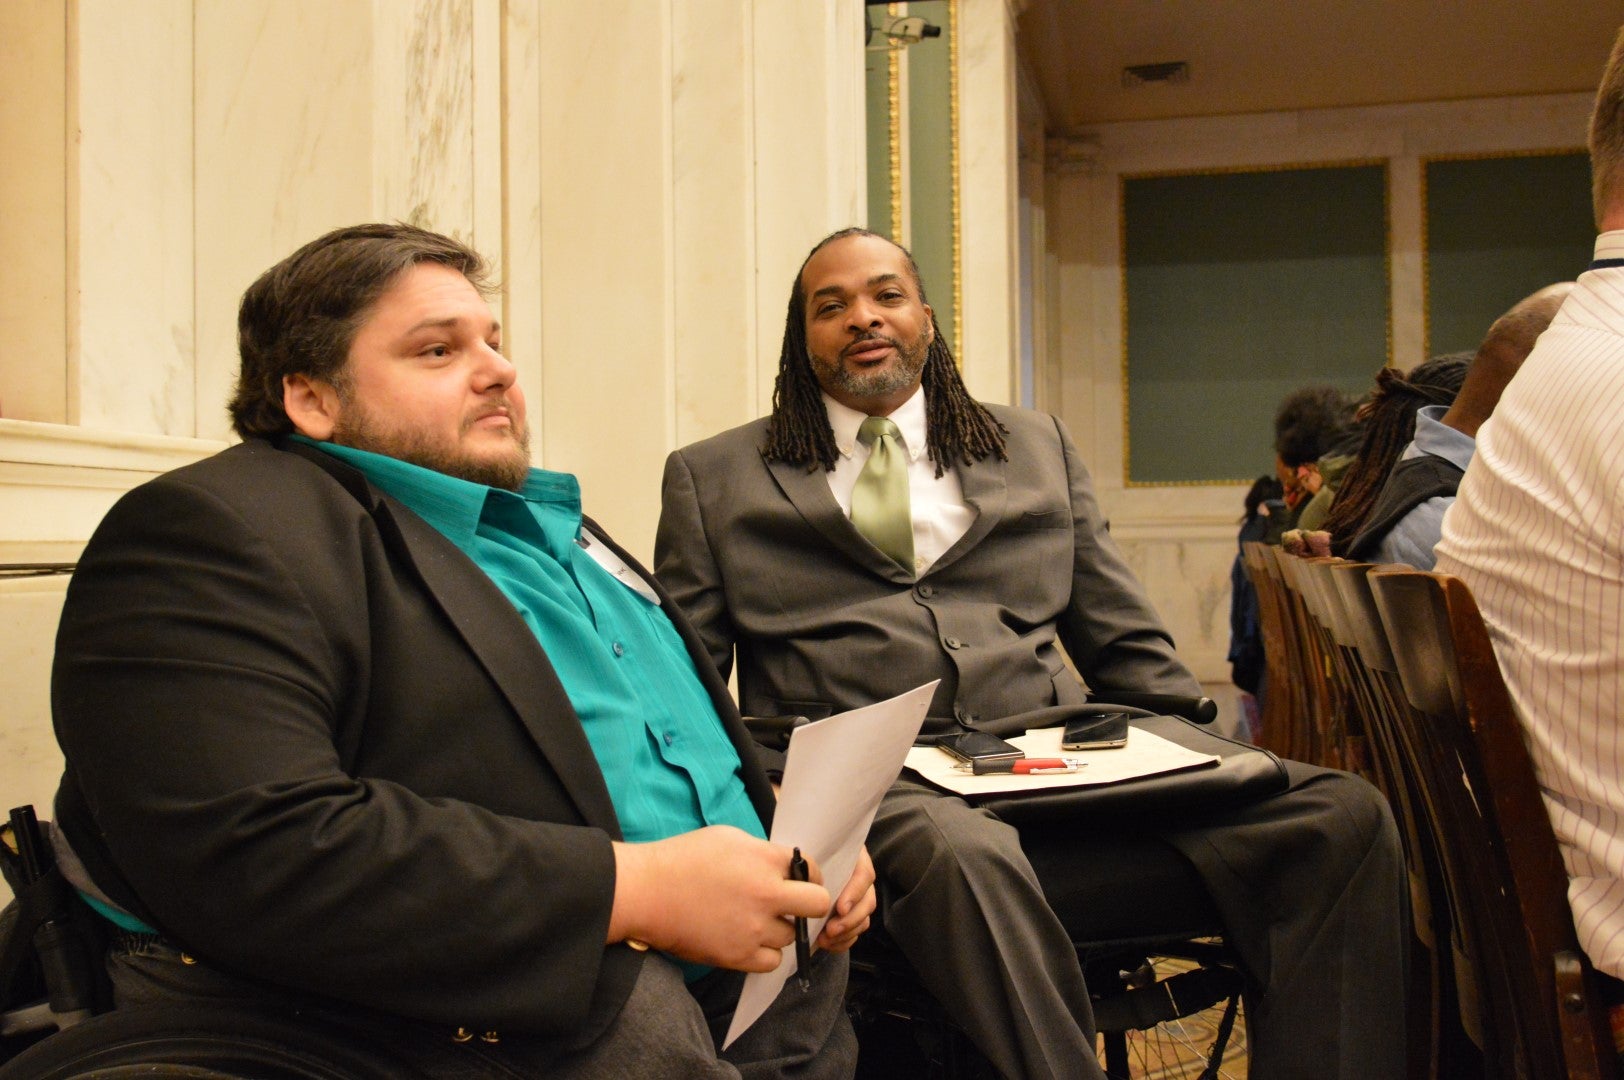 Charles Horton and Matt Clark talk during City Council hearing on funding for the city's commission on disabilities.  (Tom MacDonald